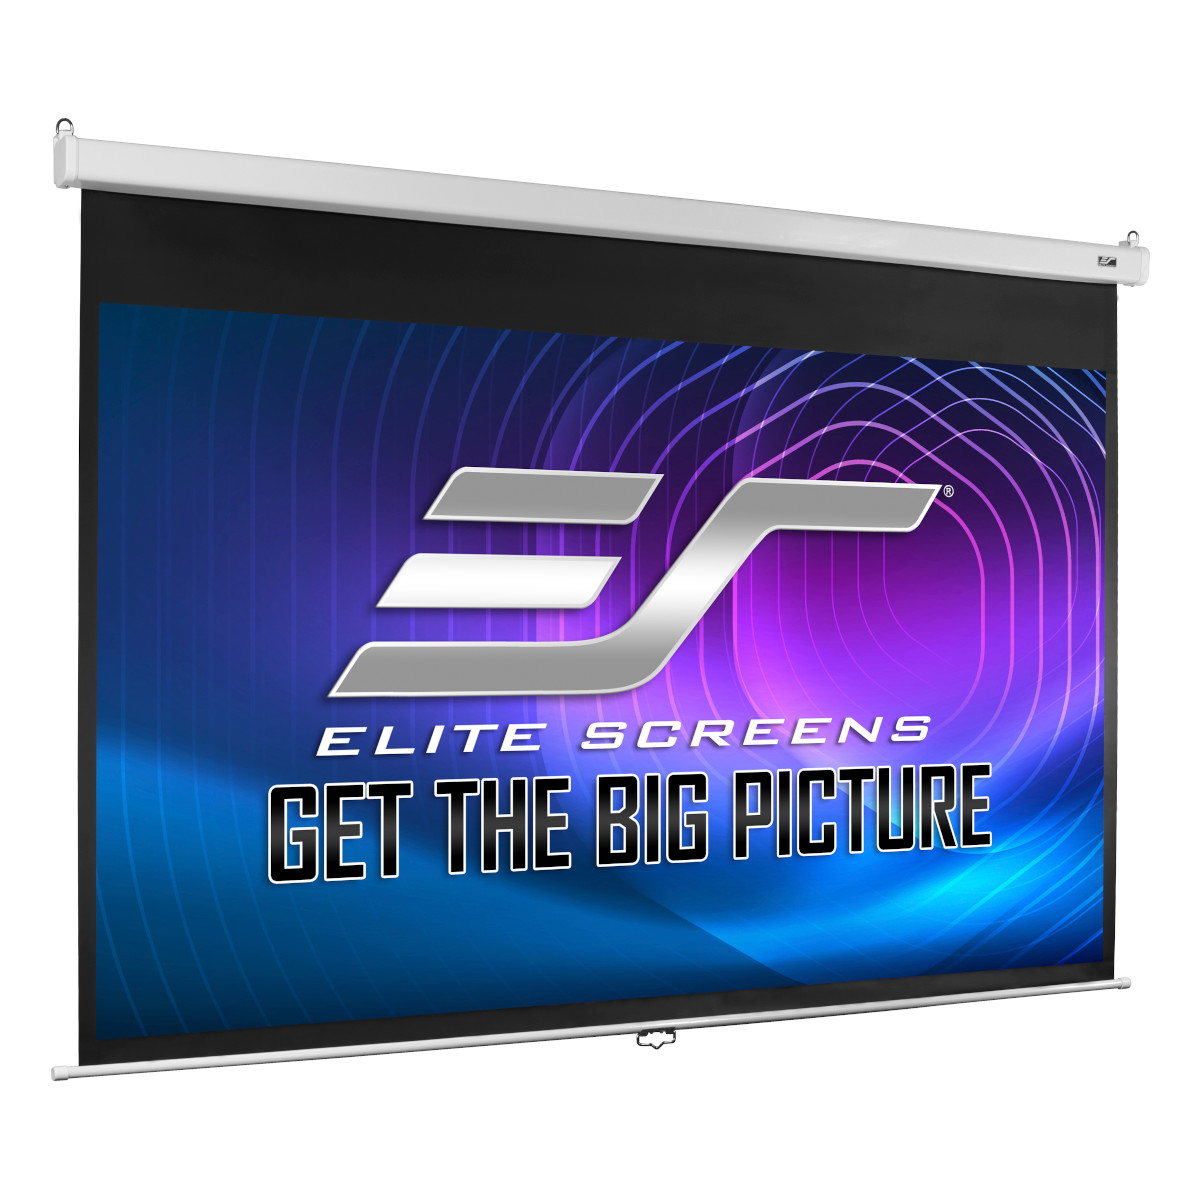 Home Cinema (16:9)/Elite Screens: Elite, Screens, PRO, 100, (2.2m, wide), 16:9, Manual, Pull, Down, Screen, with, Slow, Retraction, and, WHITE, Case, 